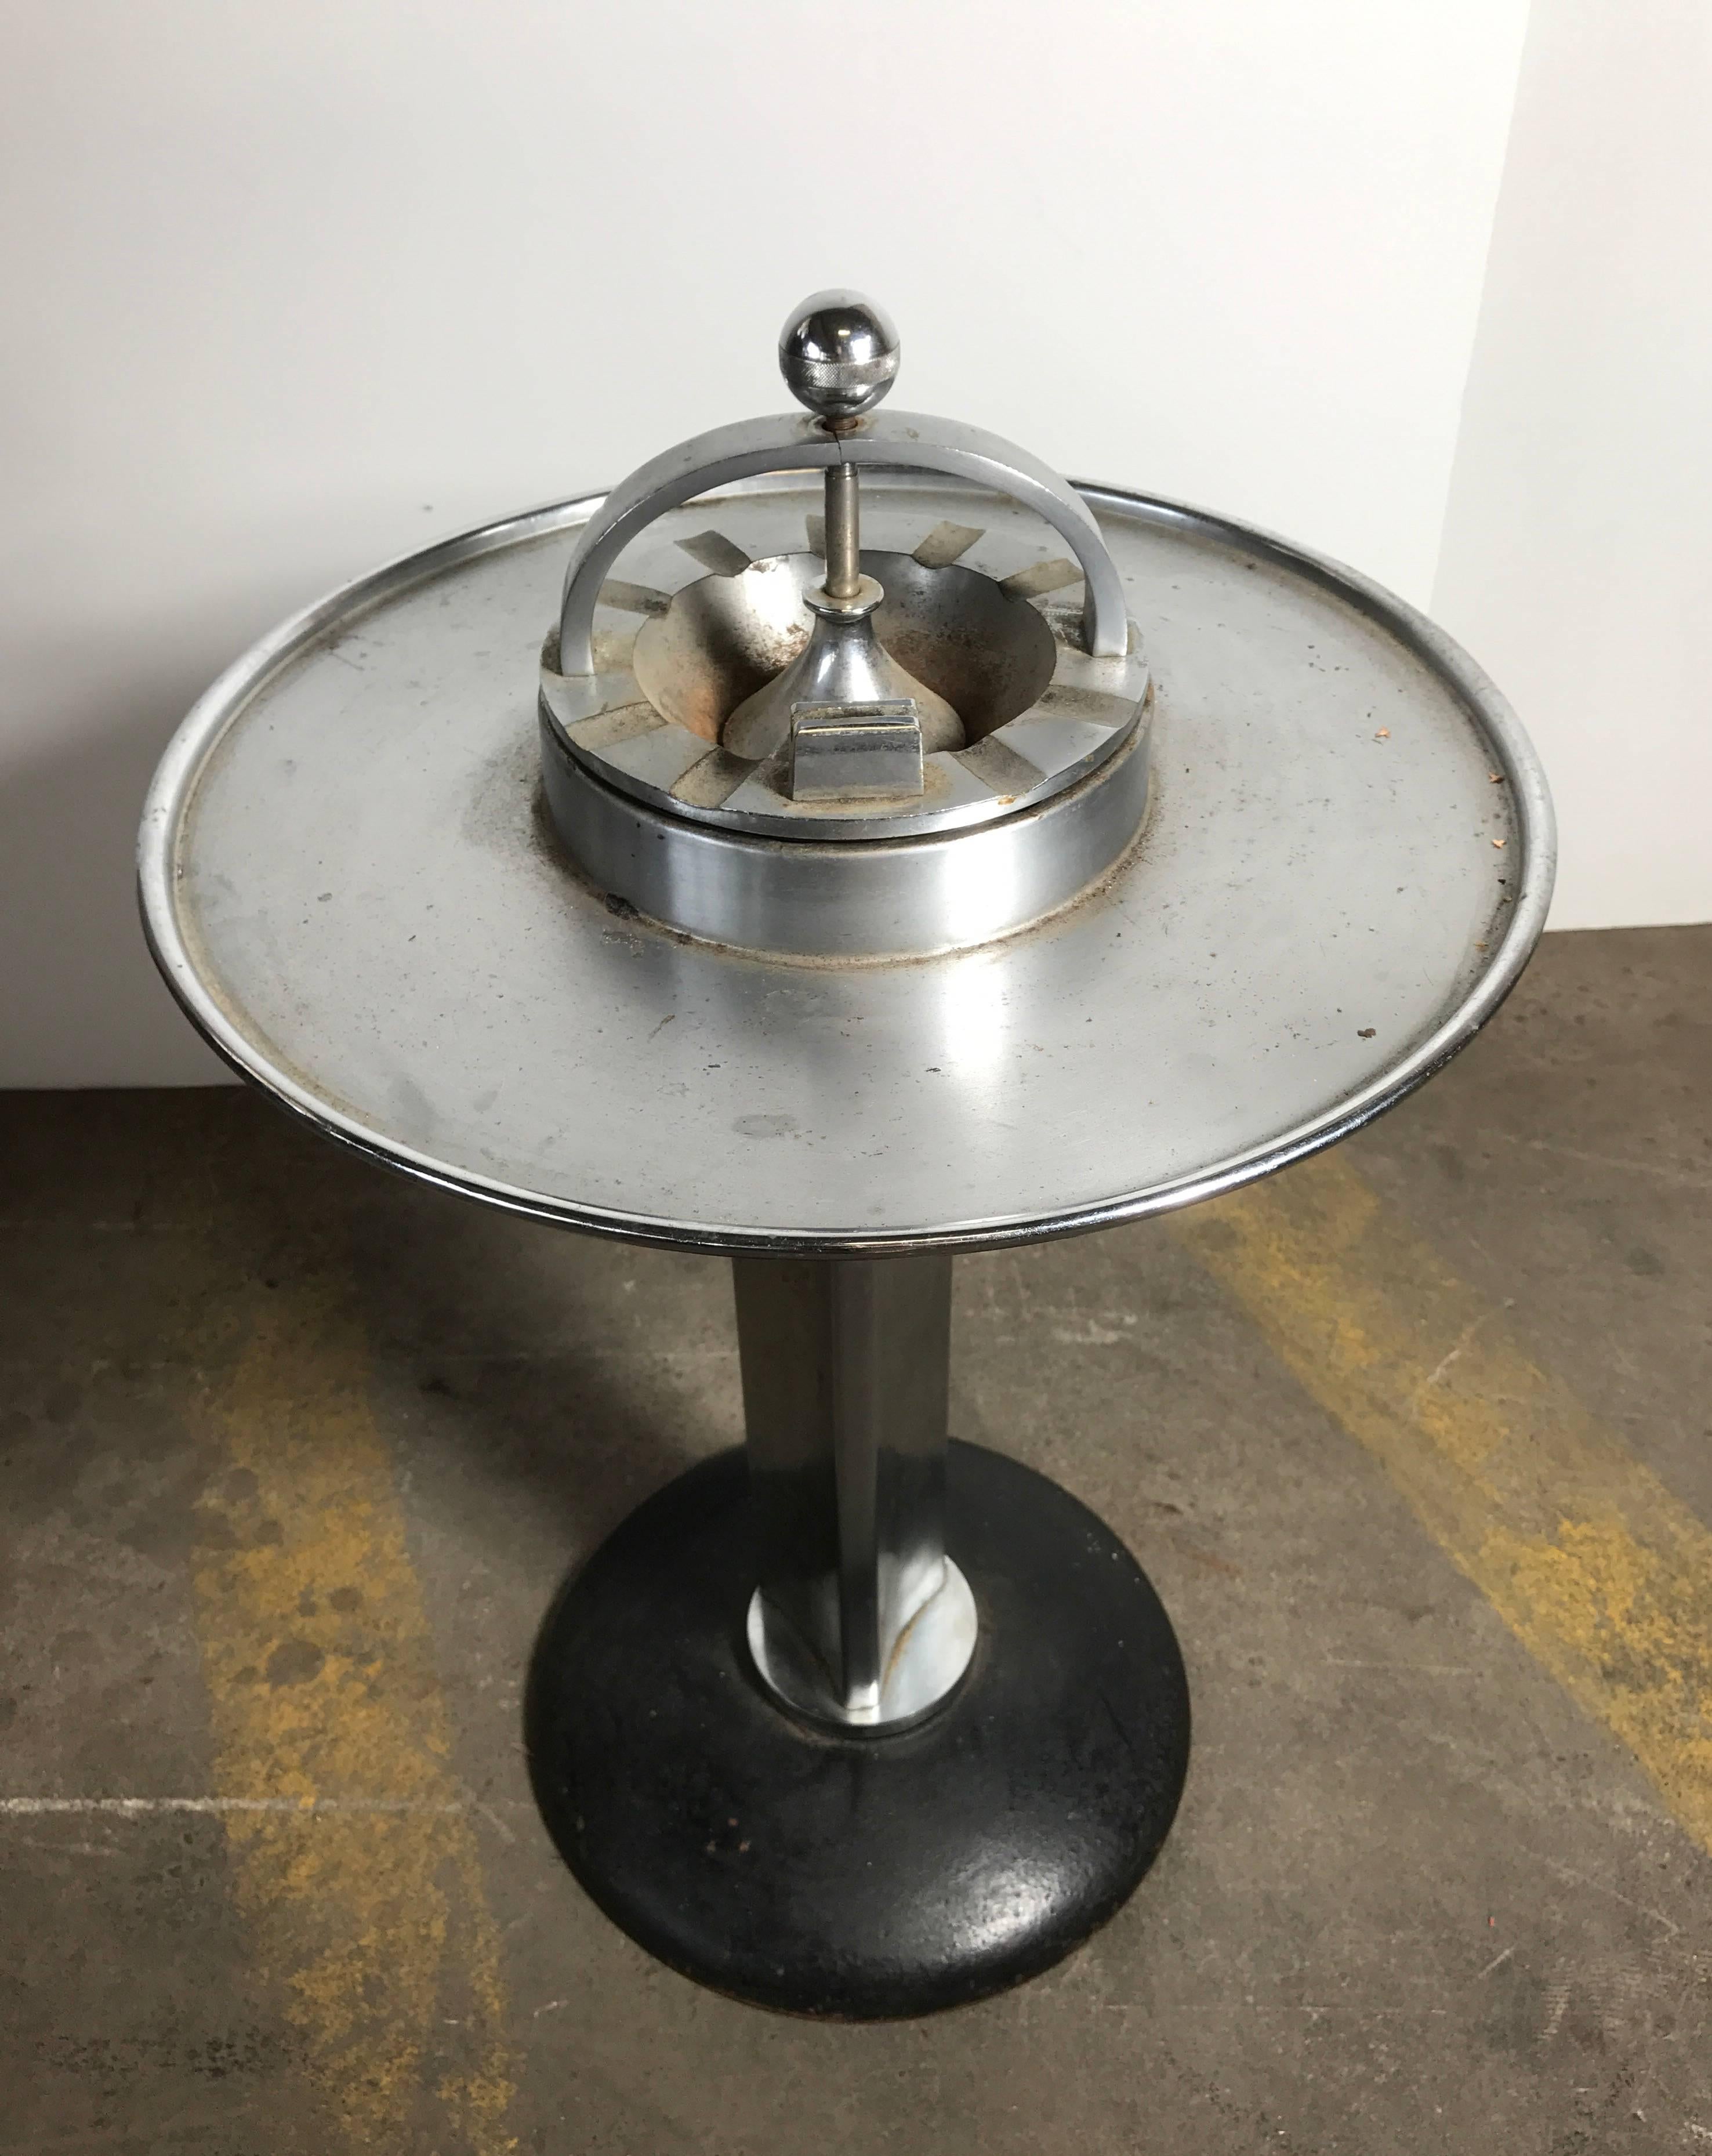 Art Deco Machine Age smoking stand with table manner of Donald Deskey. Amazing design and quality, Classic 1930s.